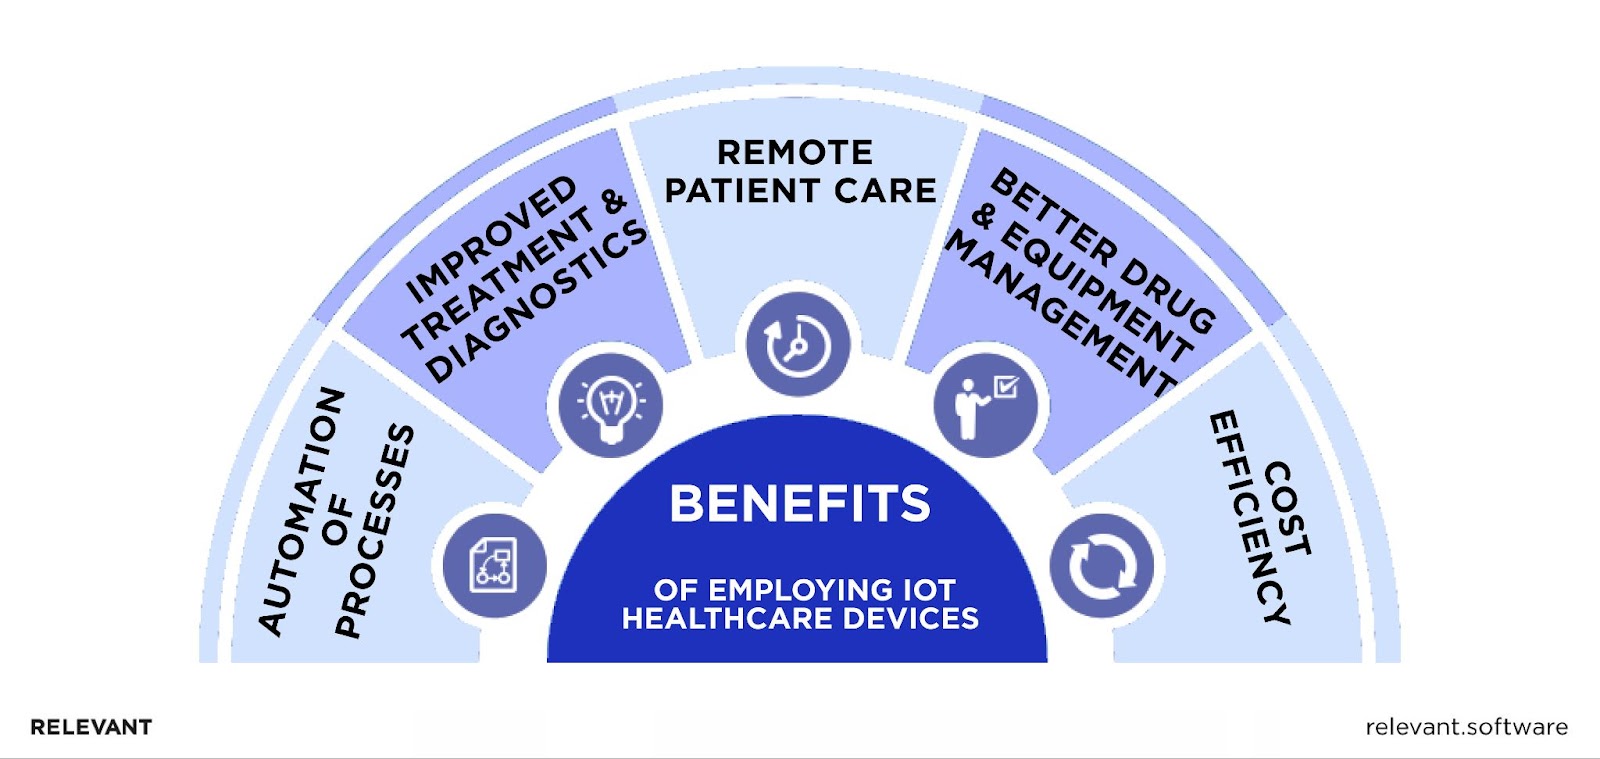 Benefits of IoT Healthcare Devices